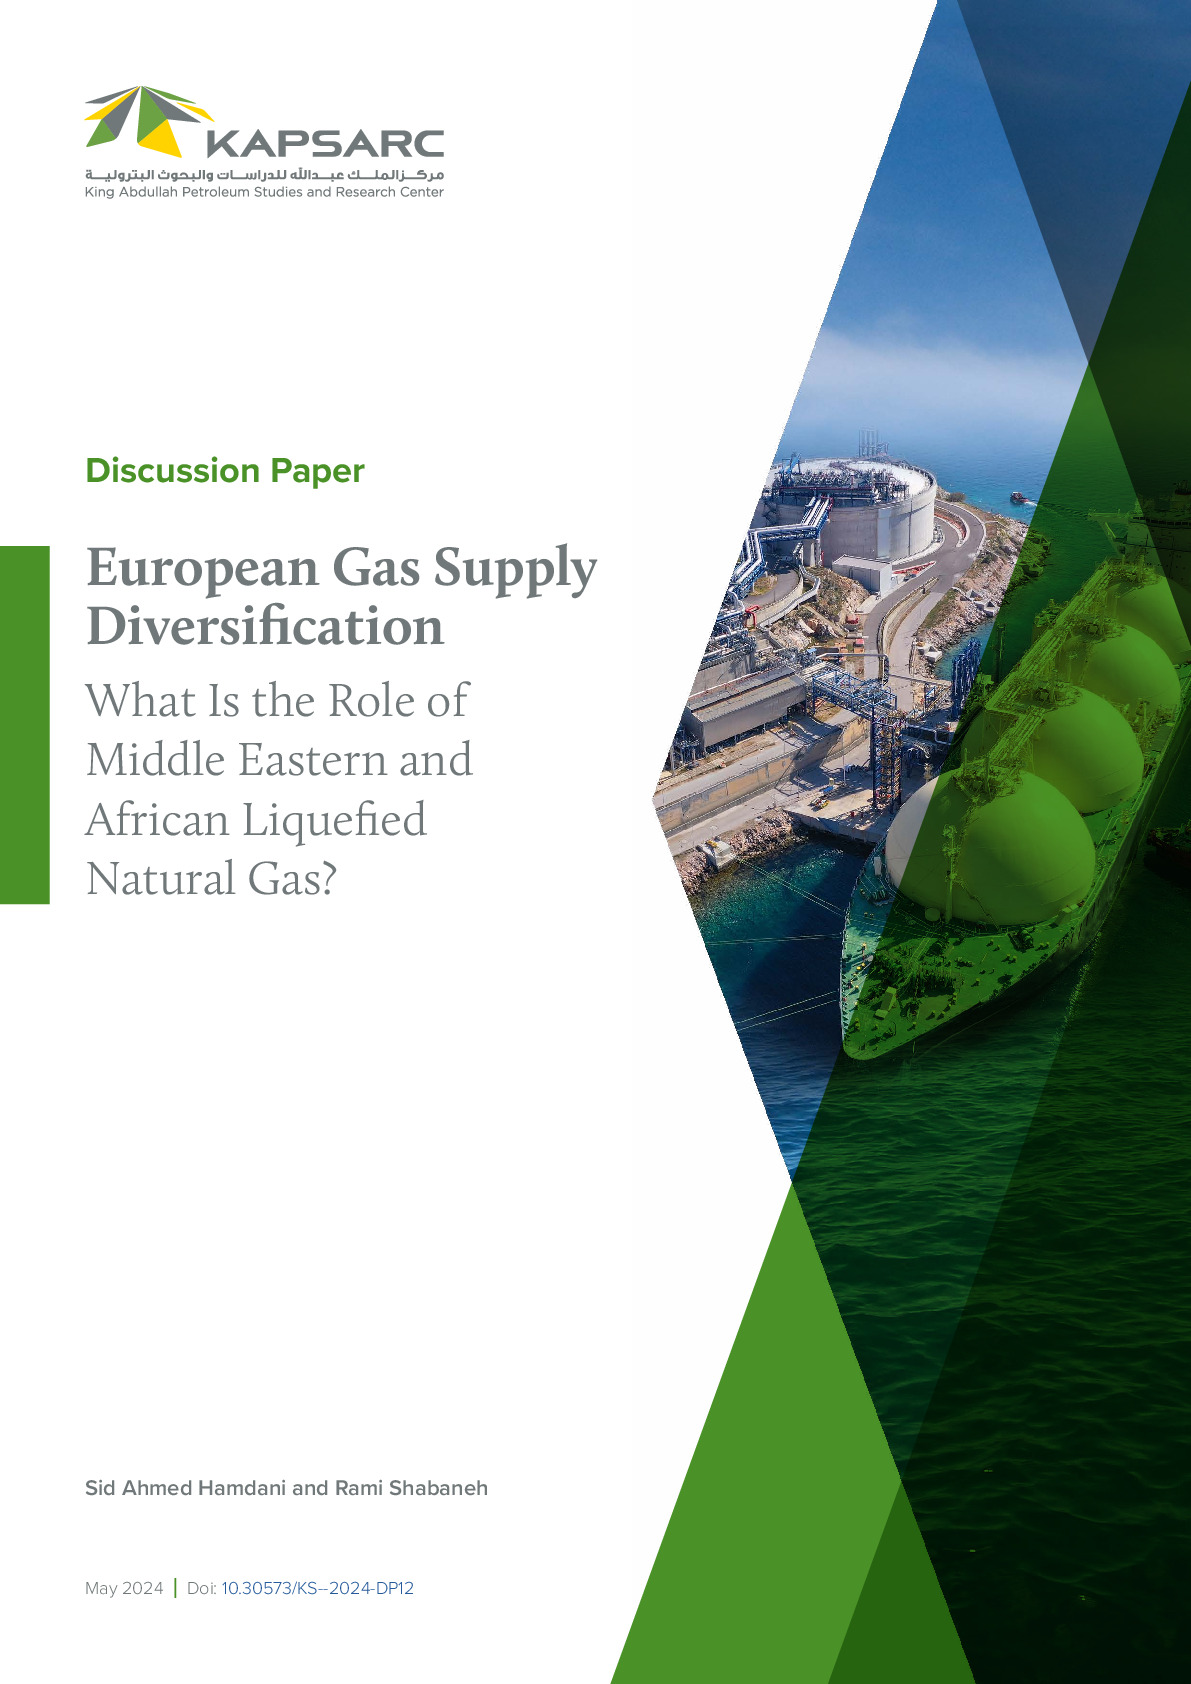 European Gas Supply Diversification: What Is the Role of Middle Eastern and African Liquefied Natural Gas?